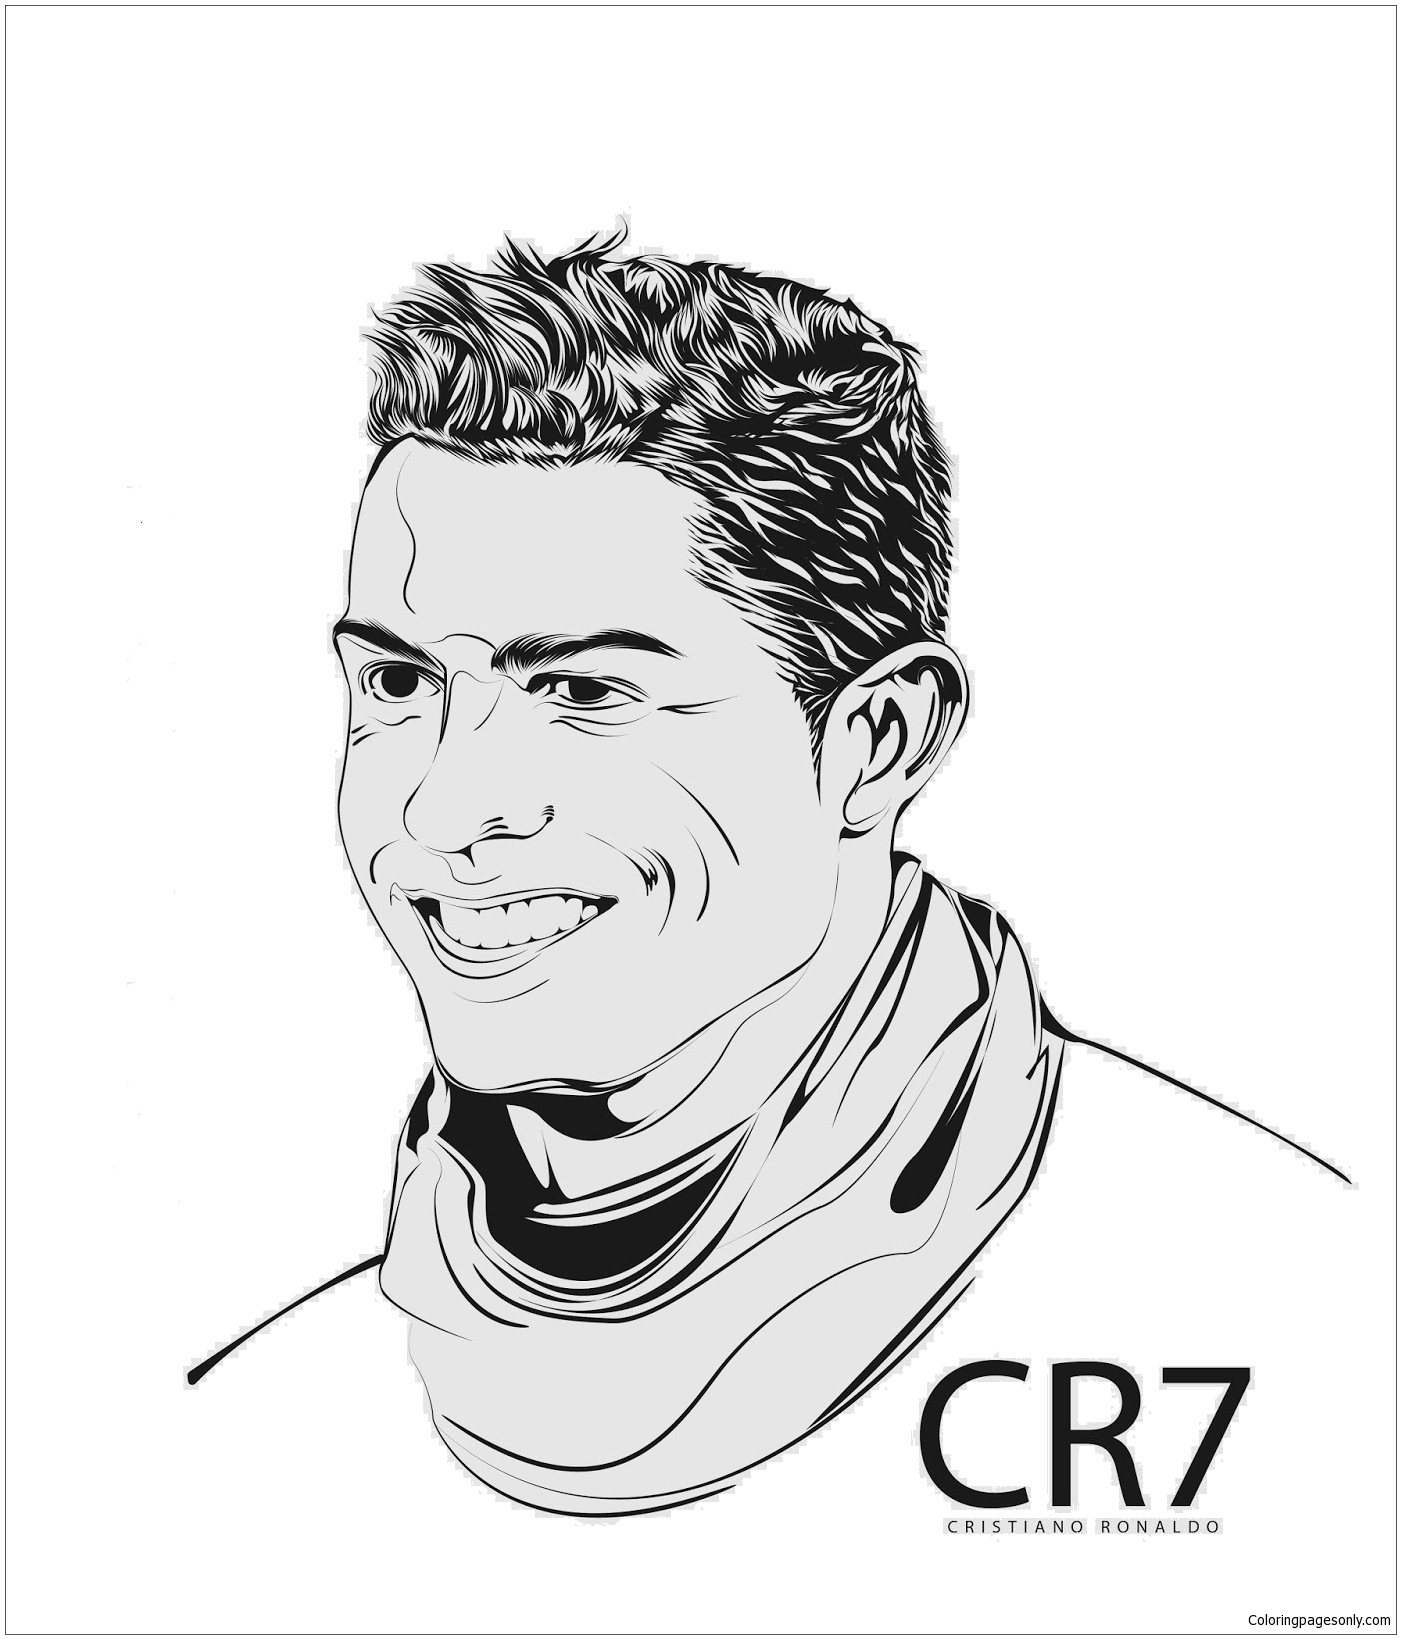 Cristiano Ronaldo-image 8 Coloring Pages